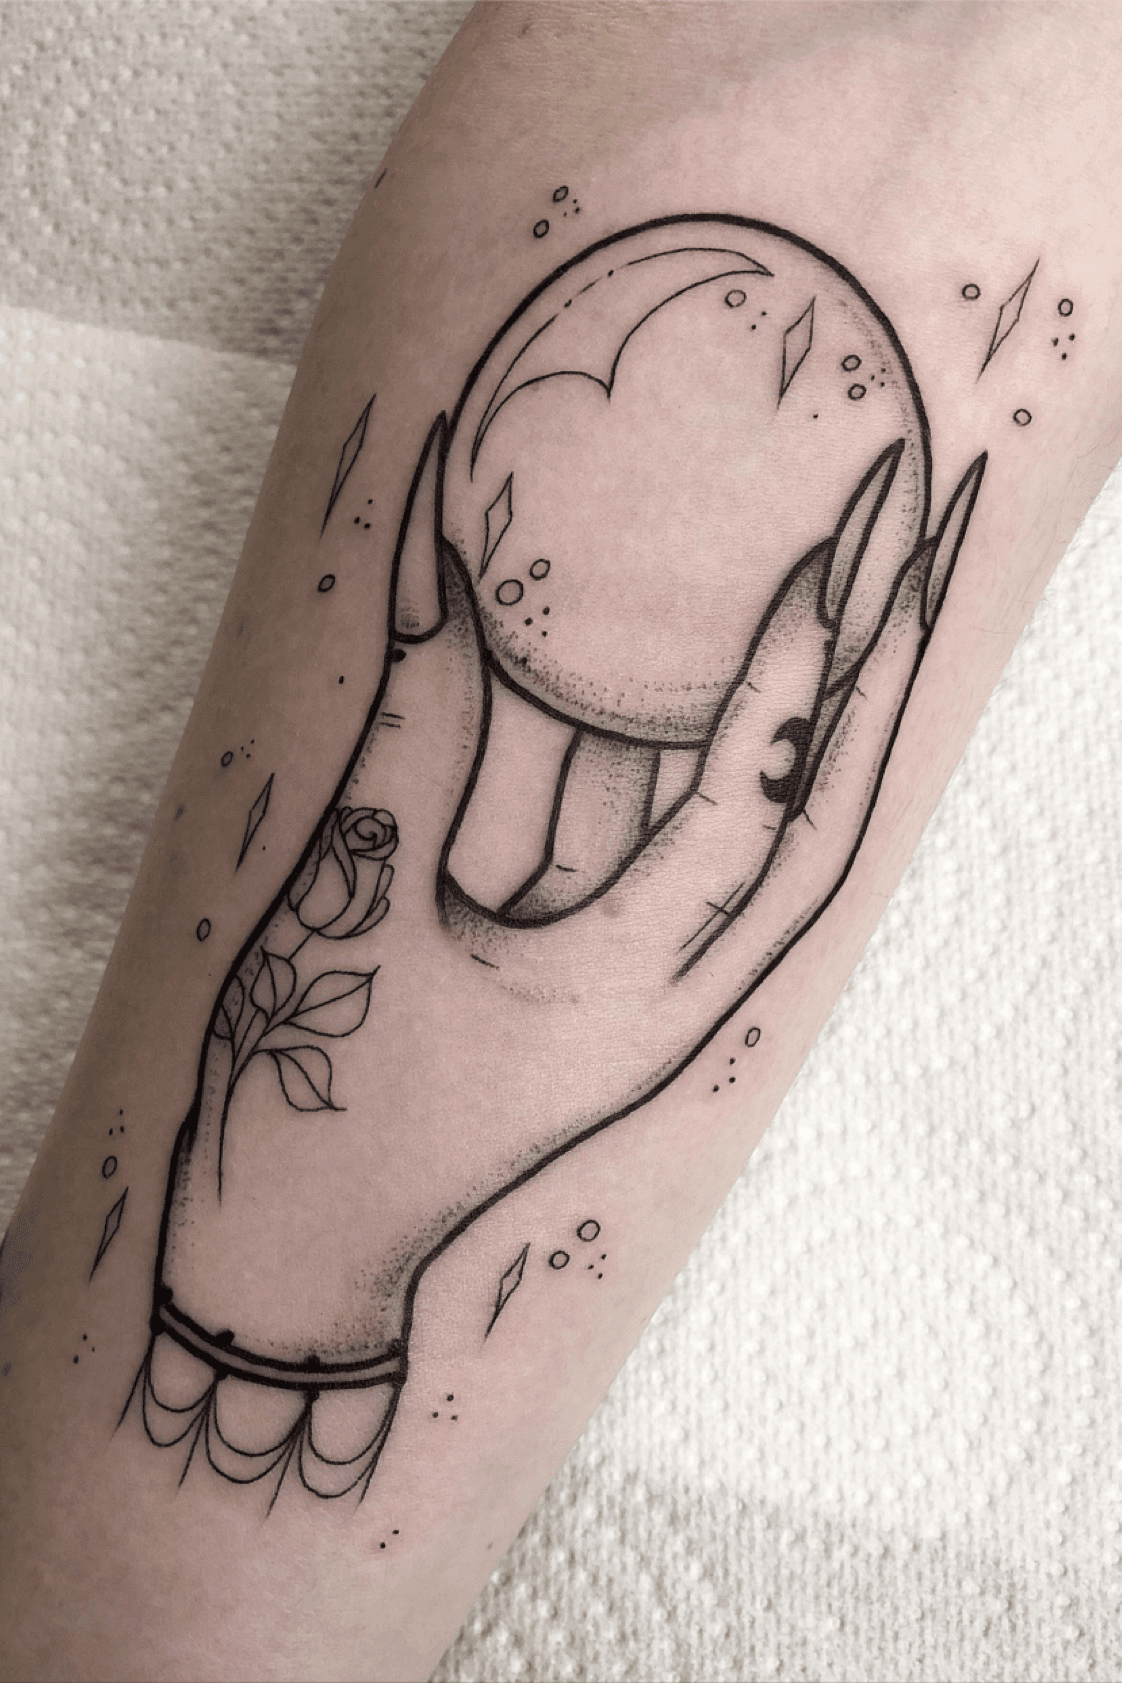 Sp000kySam on Twitter Witchy Hand tattoo I got to do before the rona   tattoo witch moon inked httpstcot3S8yK2gyQ  Twitter